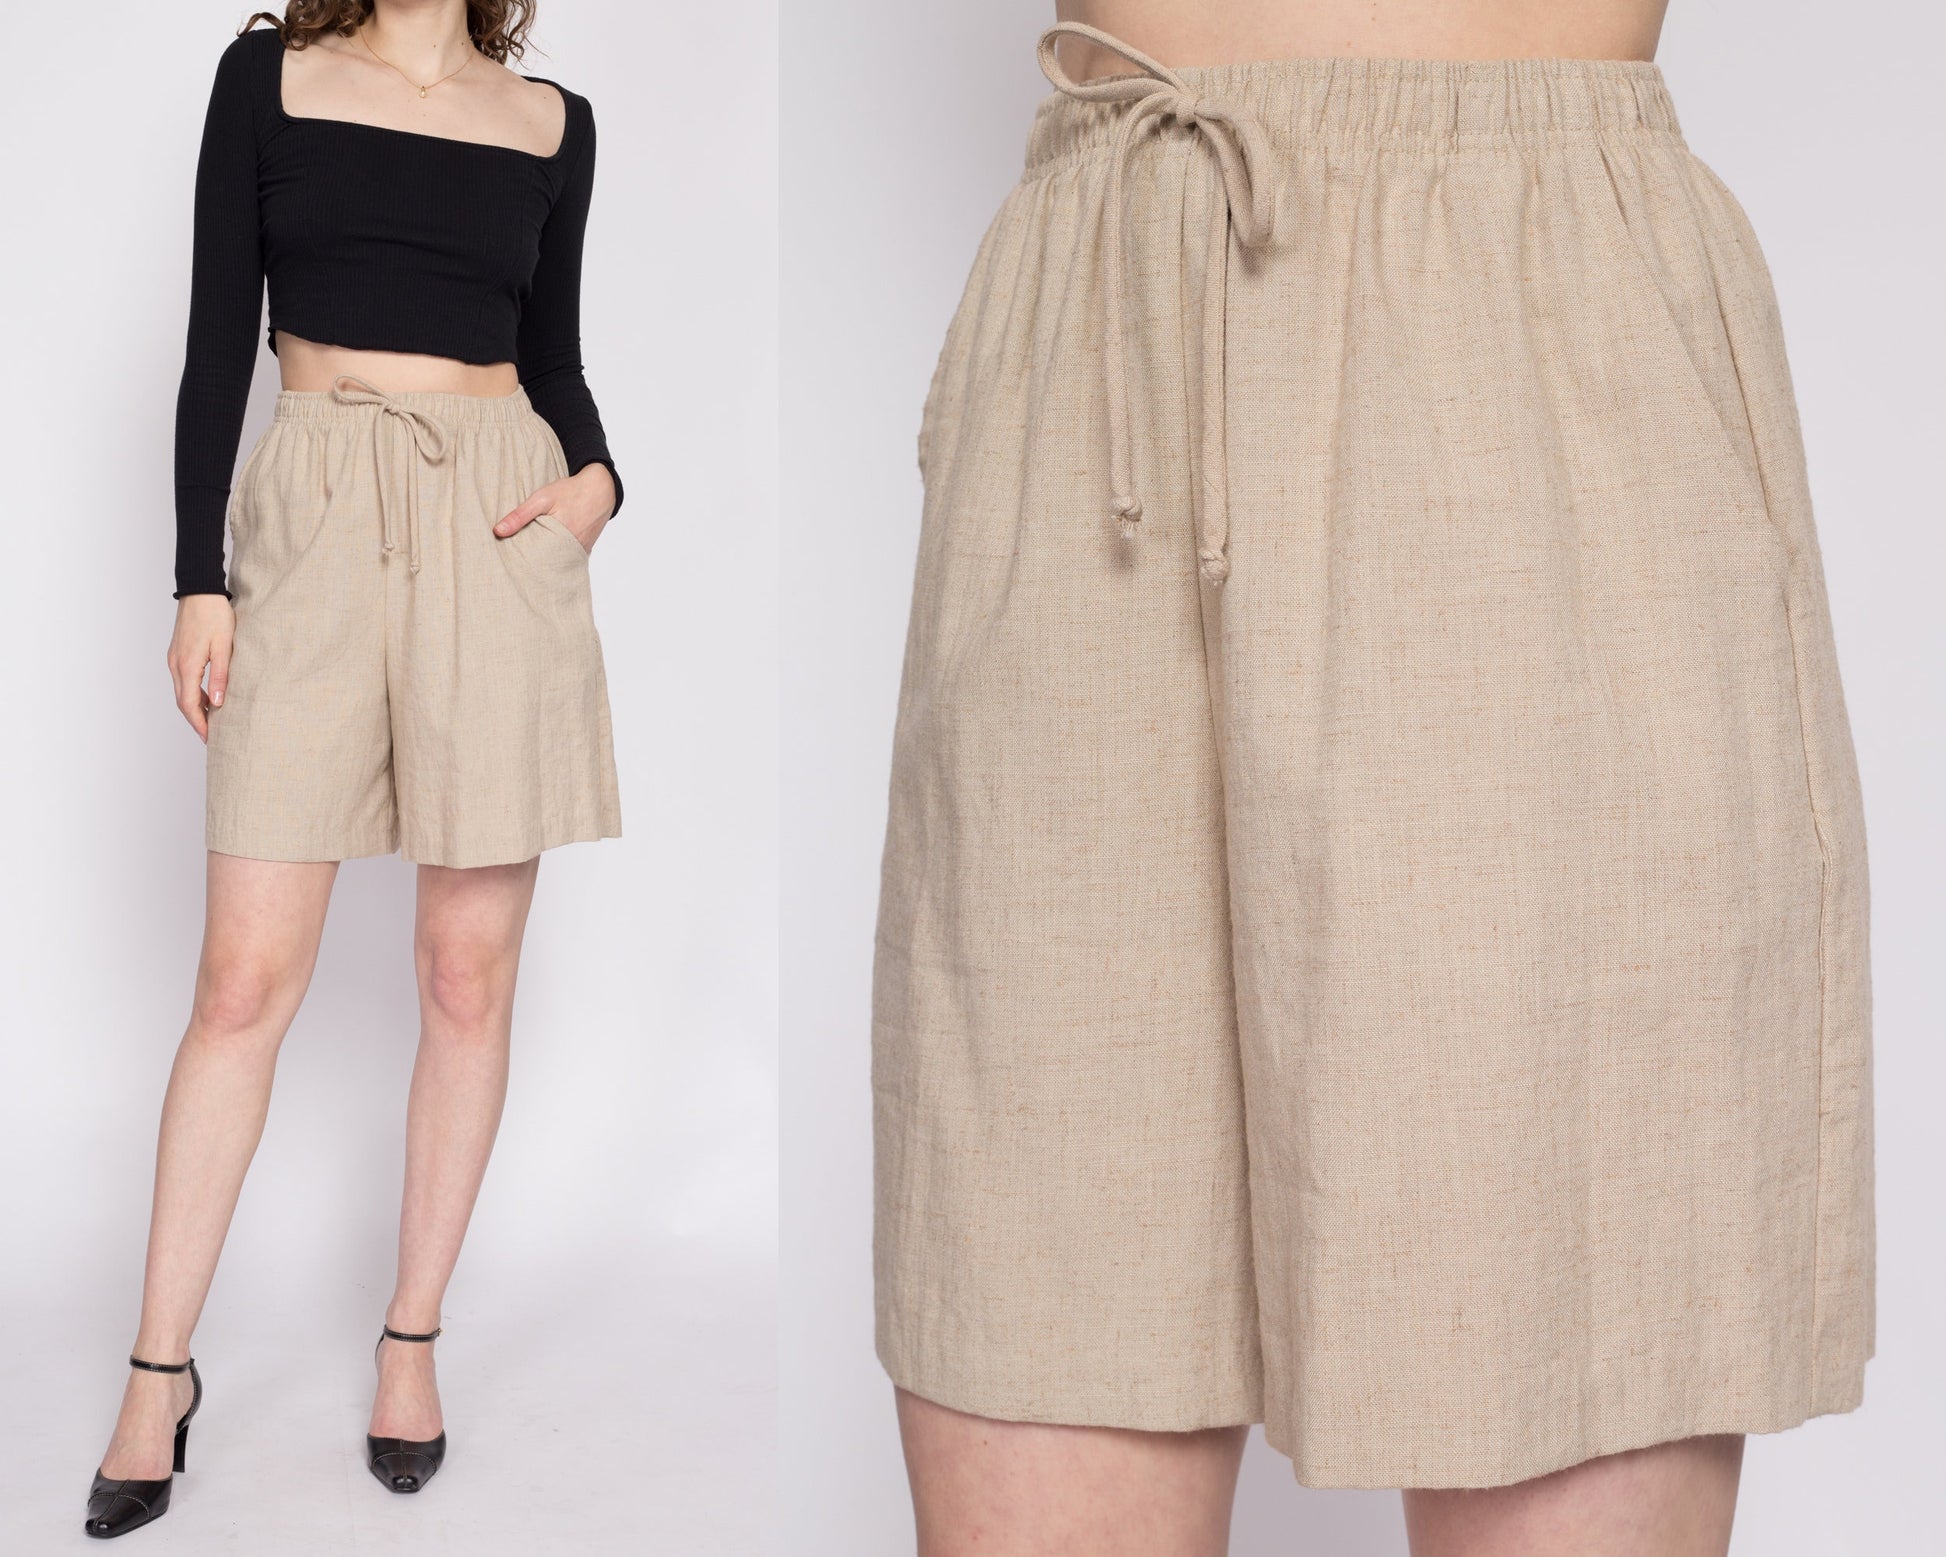 90s Oatmeal Linen Shorts - Small to Medium | Vintage Pleated Wide Leg Elastic Waist High Rise Casual Shorts